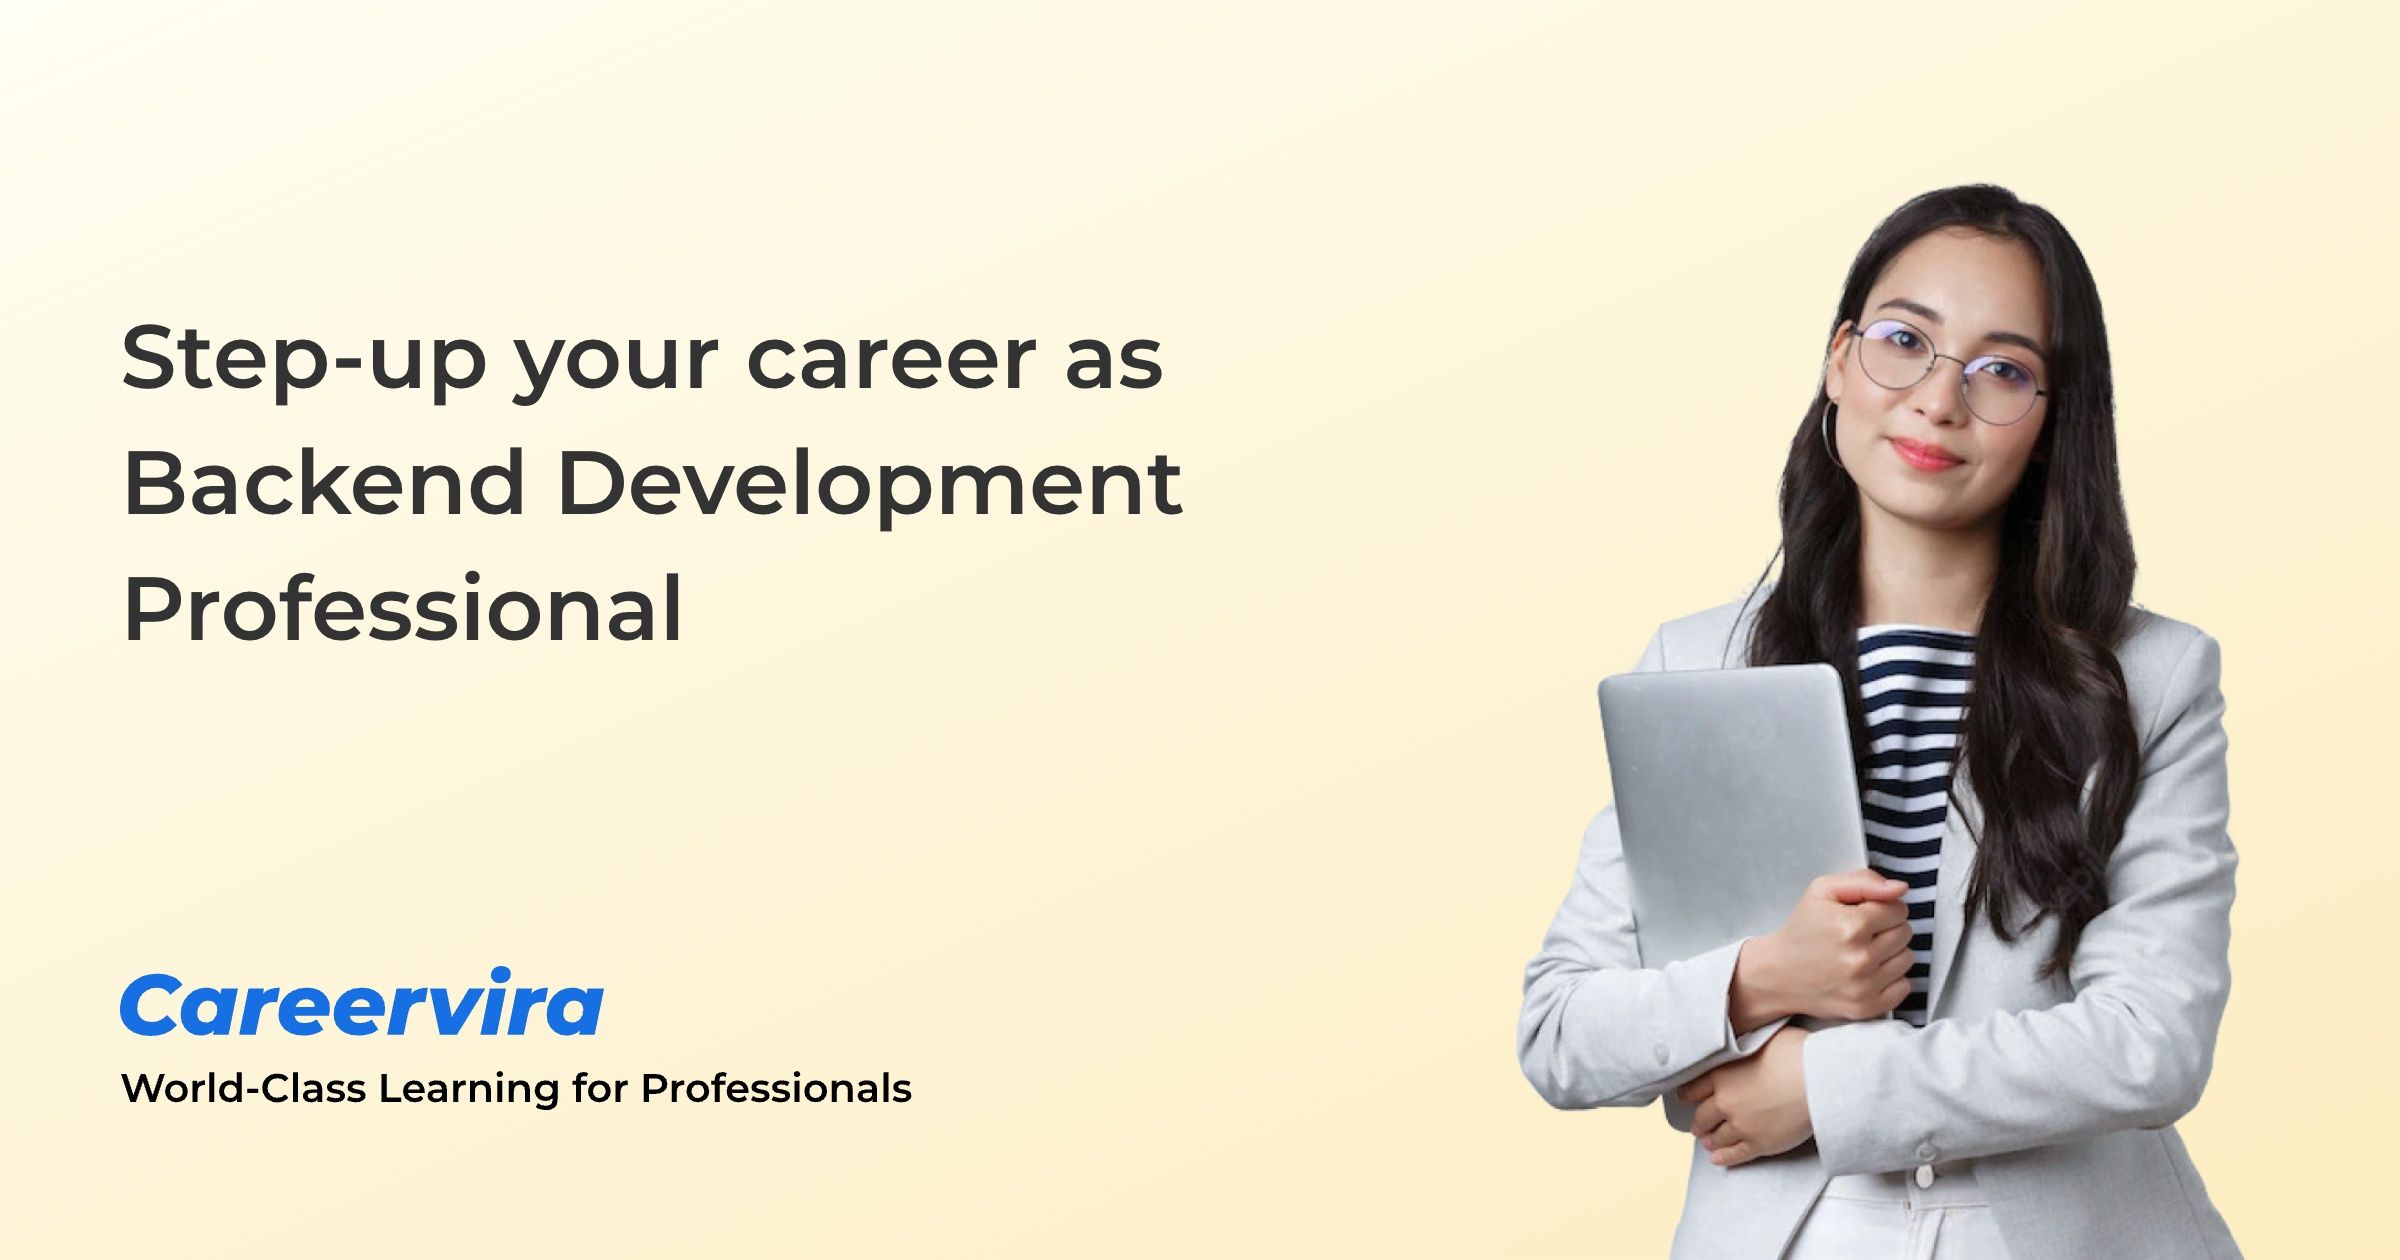 Figure: Step-up your career as Backend Development Professional